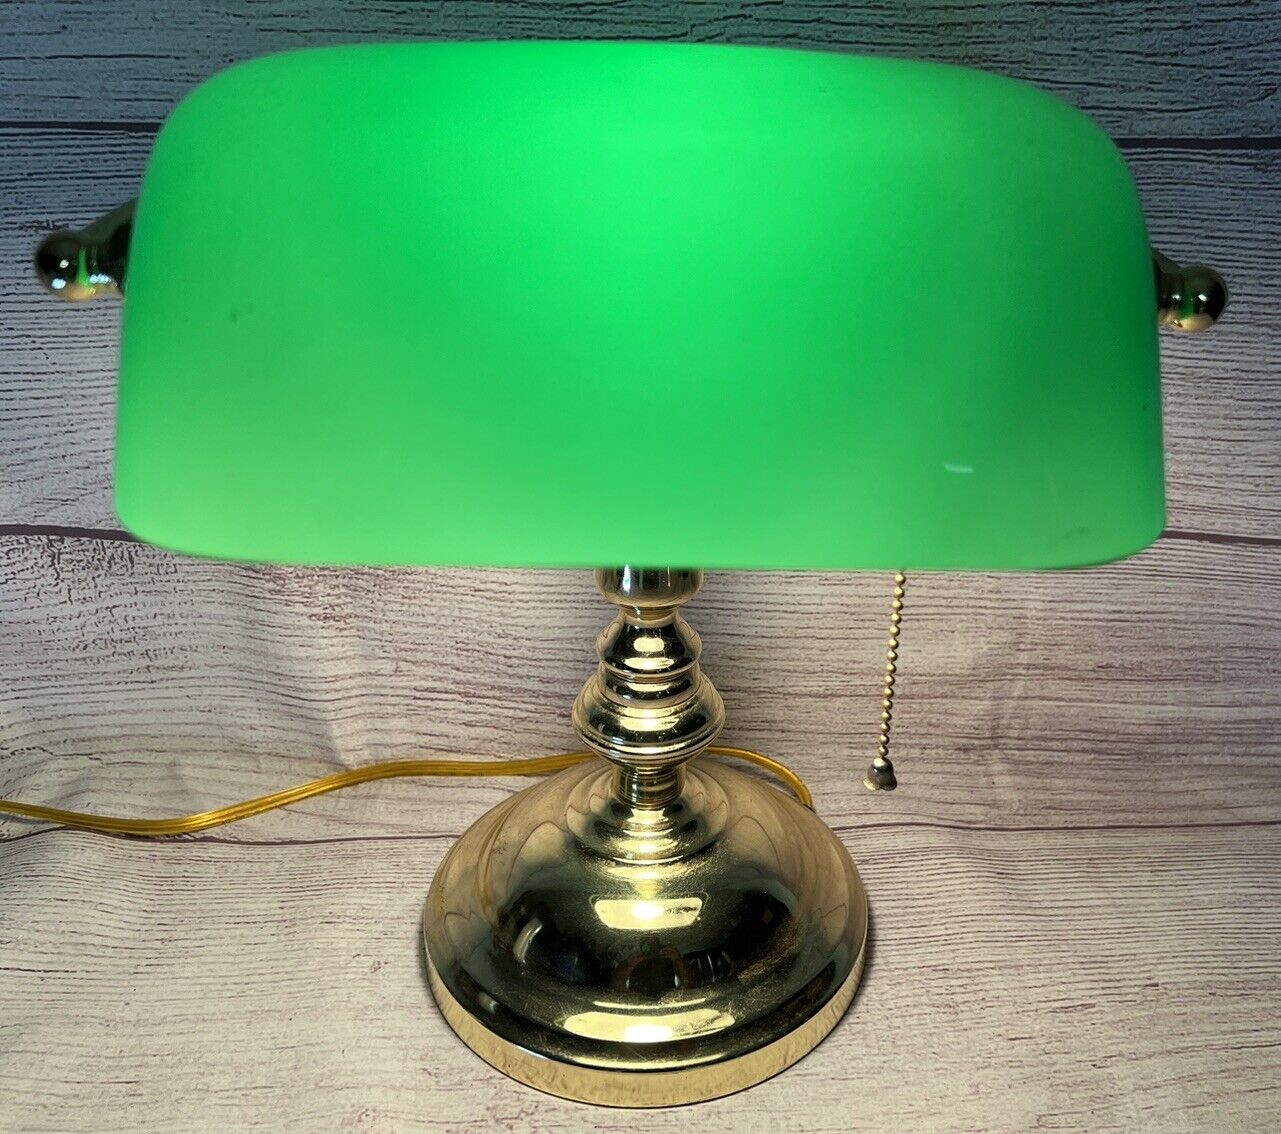 Vintage Banker's Desk Piano Lamp Green Glass Shade Pull Chain Brass Base